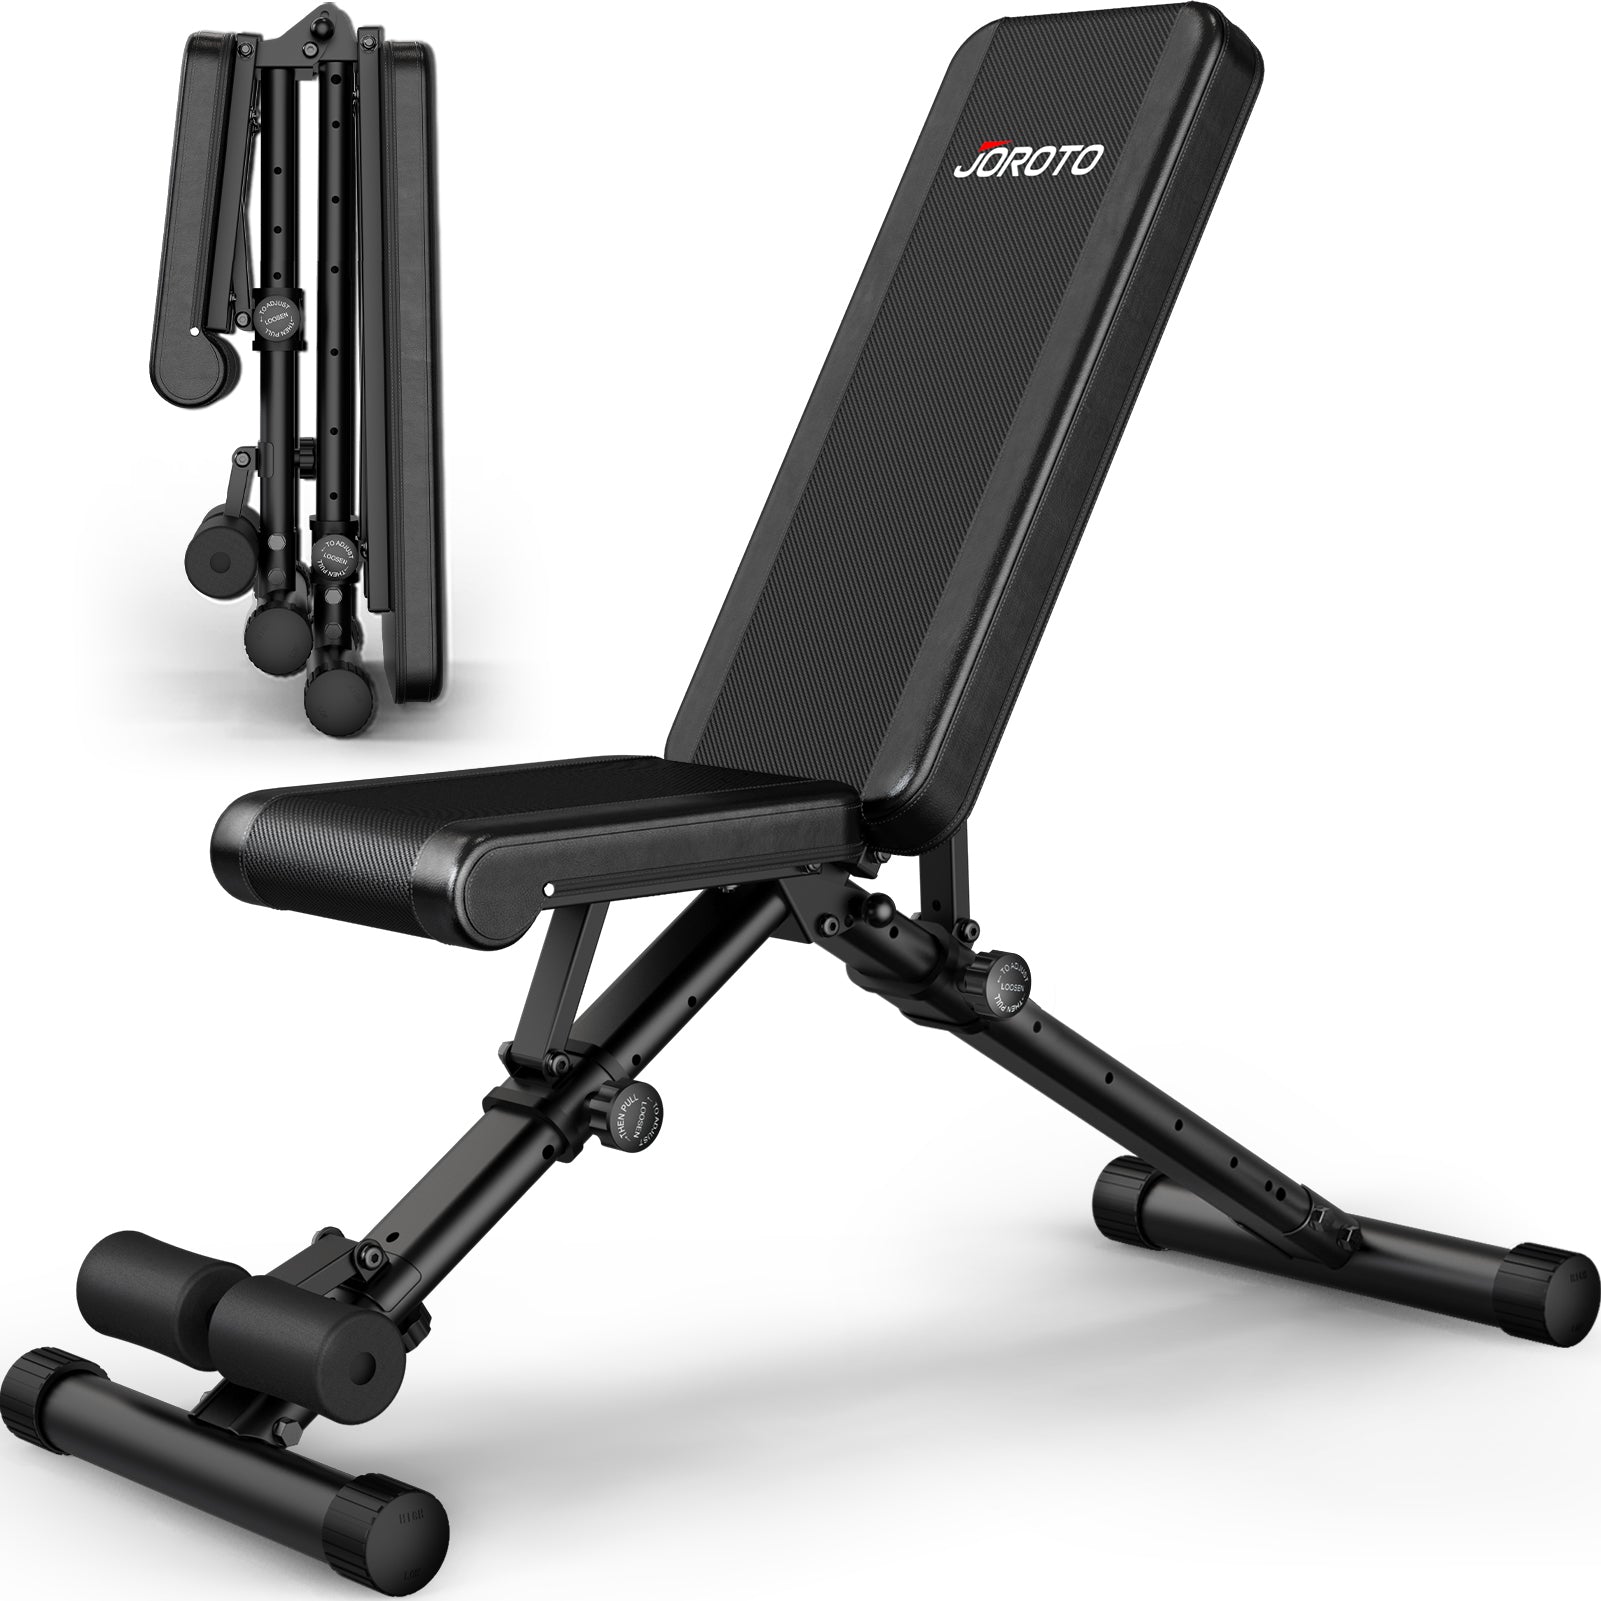 Gym Bench Incline Decline for Full Body, 700 Pounds Load MD35-Trainnox